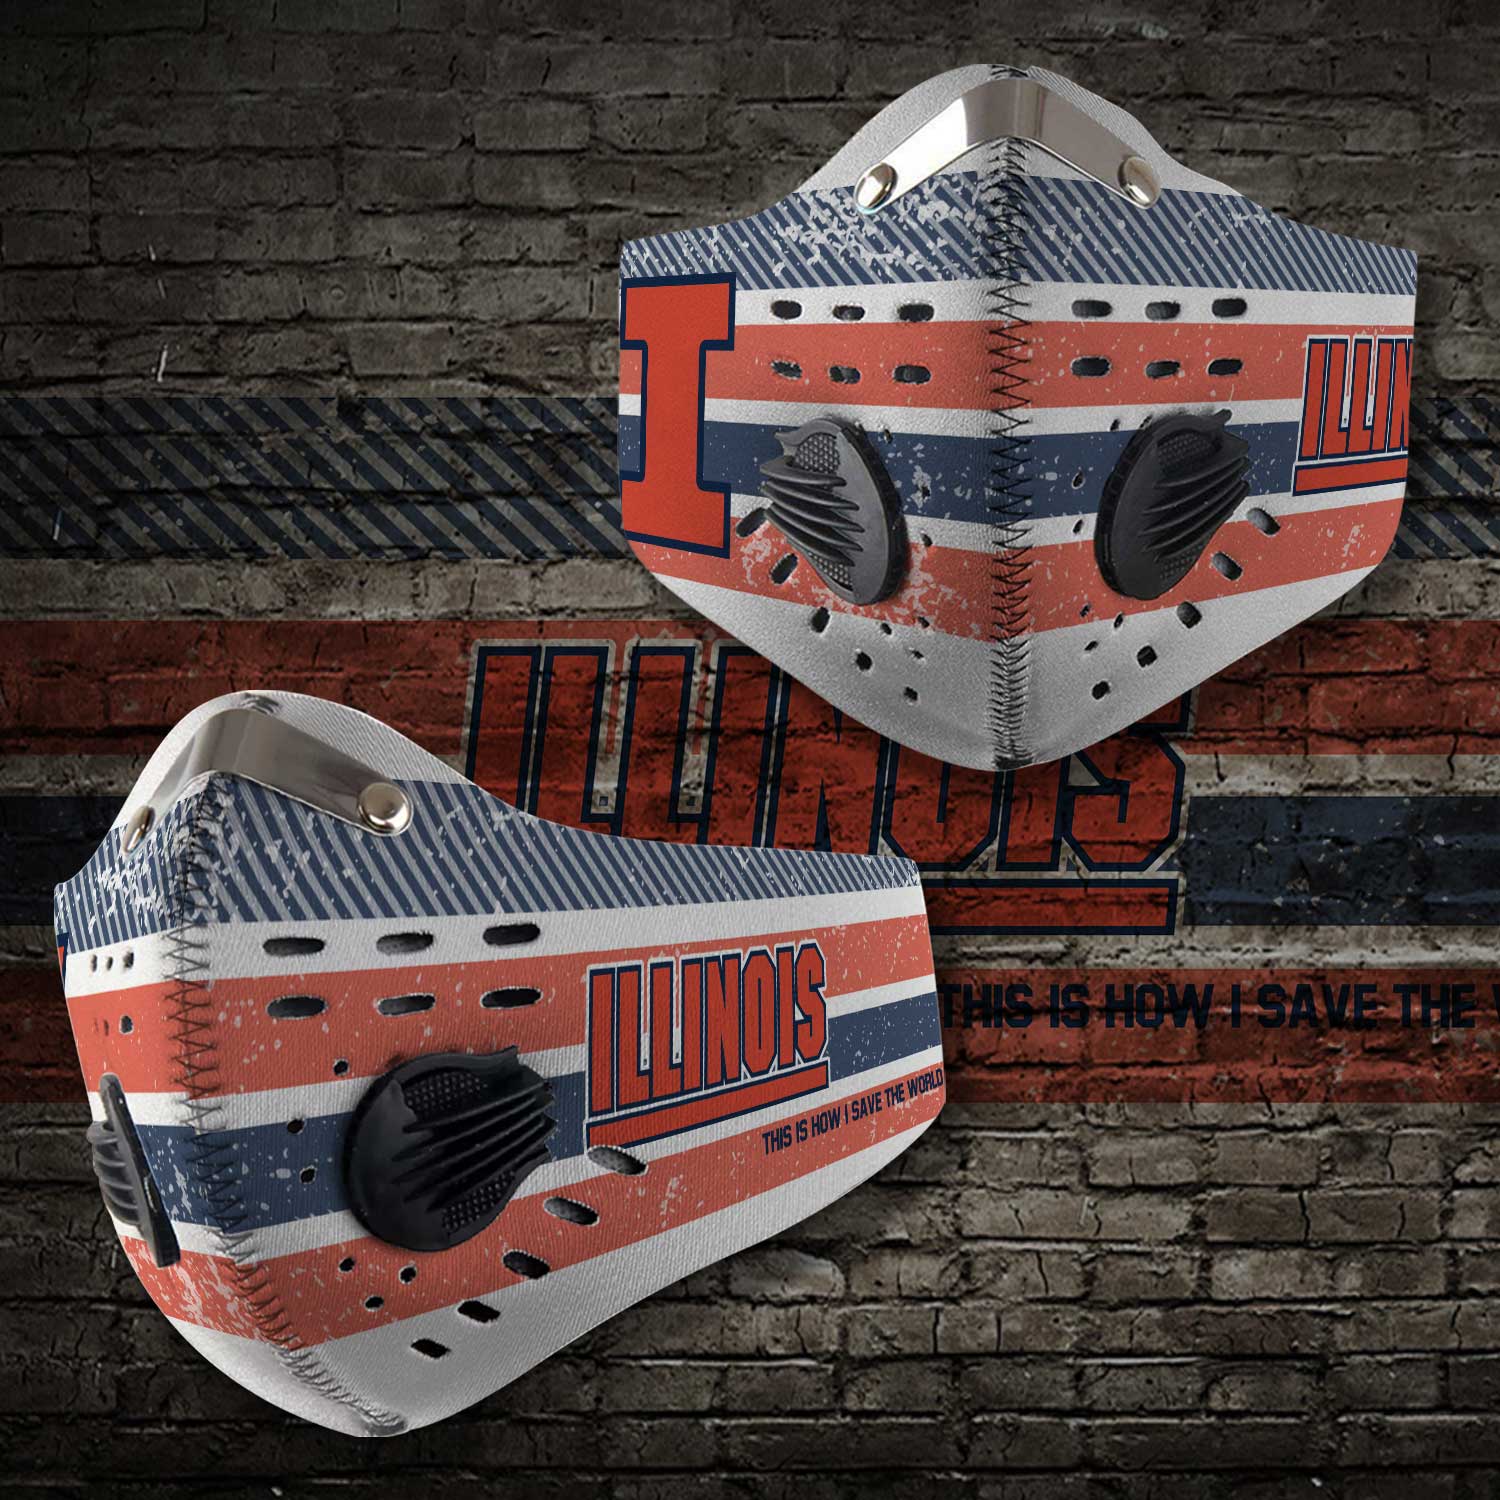 Illinois fighting illini football this is how i save the world face mask